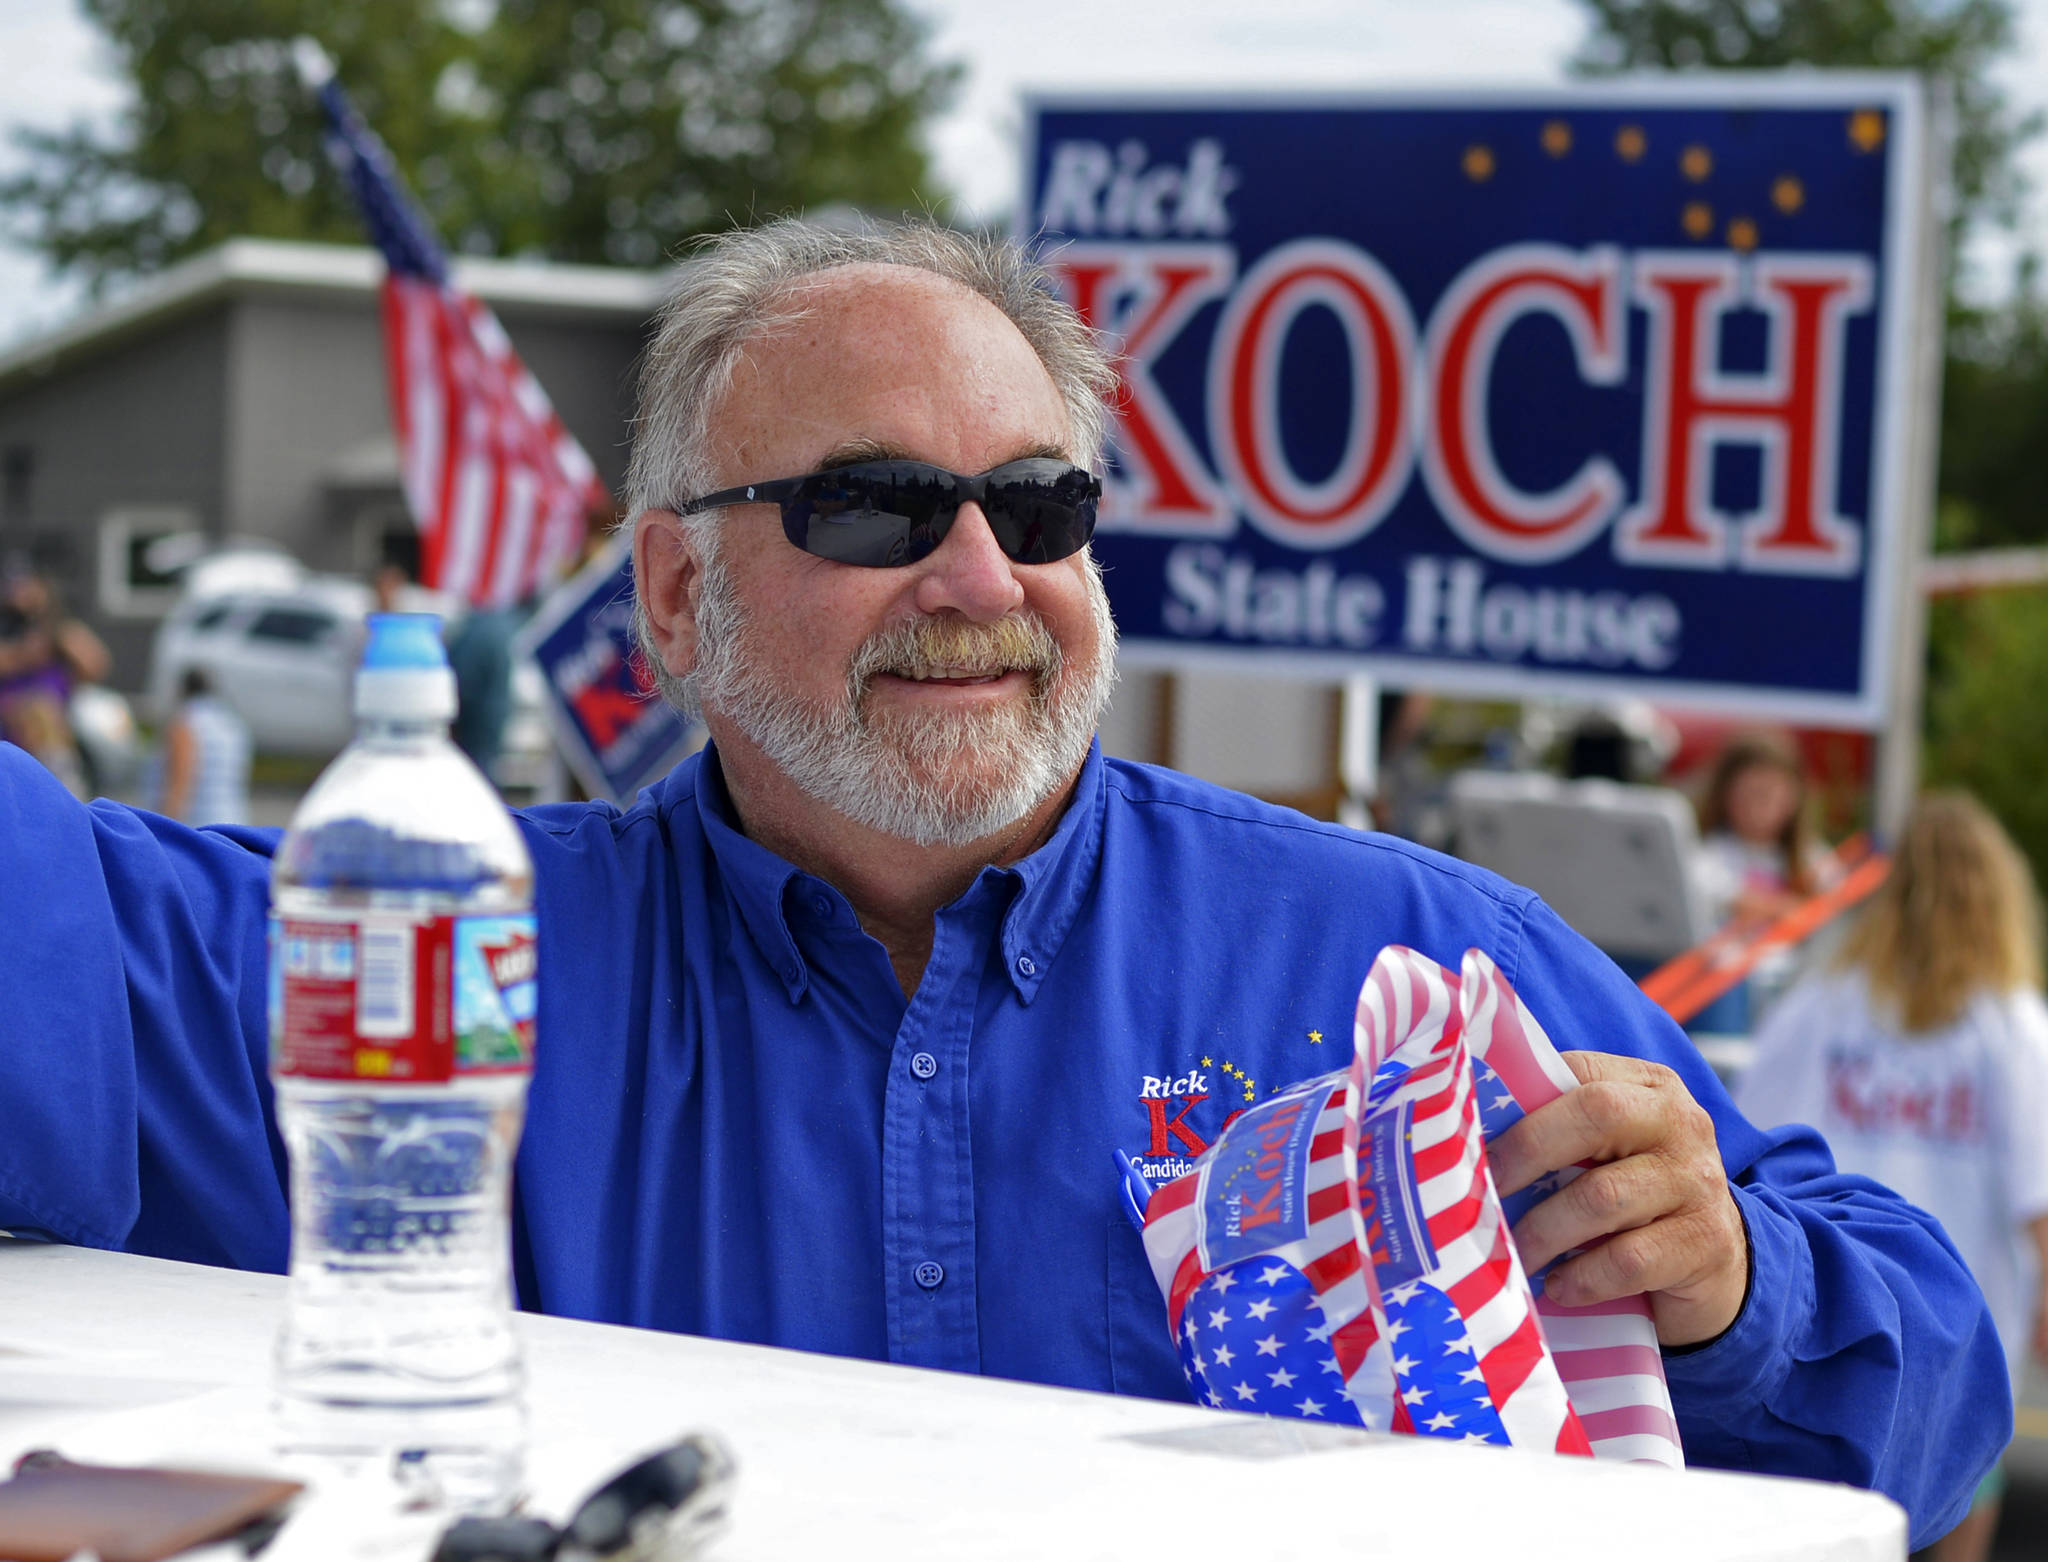 Rick Koch campaigns in his unsucessful 2016 run for the Alaska House of Representatives during Soldotna’s Progress Days Parade on July 23, 2016. Koch, who served as Kenai’s city manager from 2006 to 2016, was killed on Sunday in a motorcycle accident on the Dalton Highway.